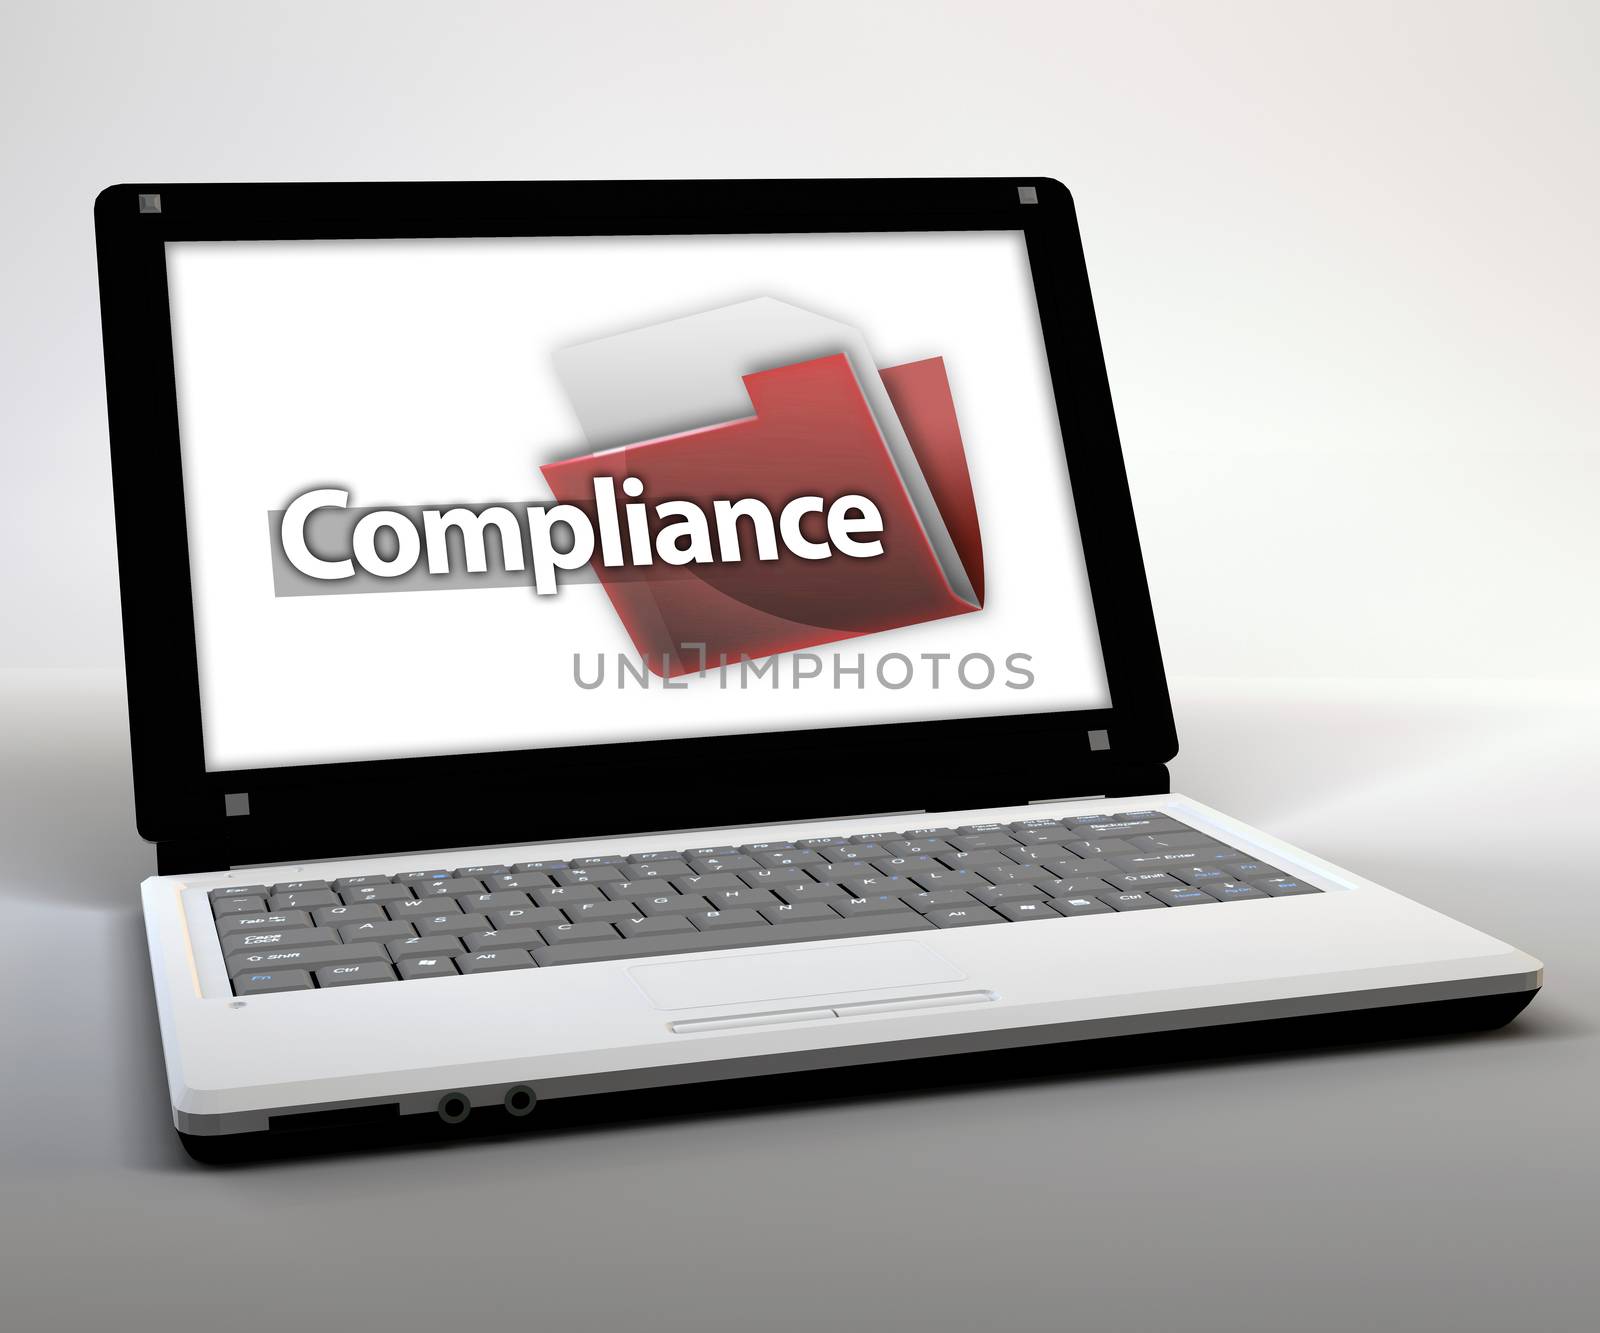 Mobile Thin Client / Netbook "Compliance"